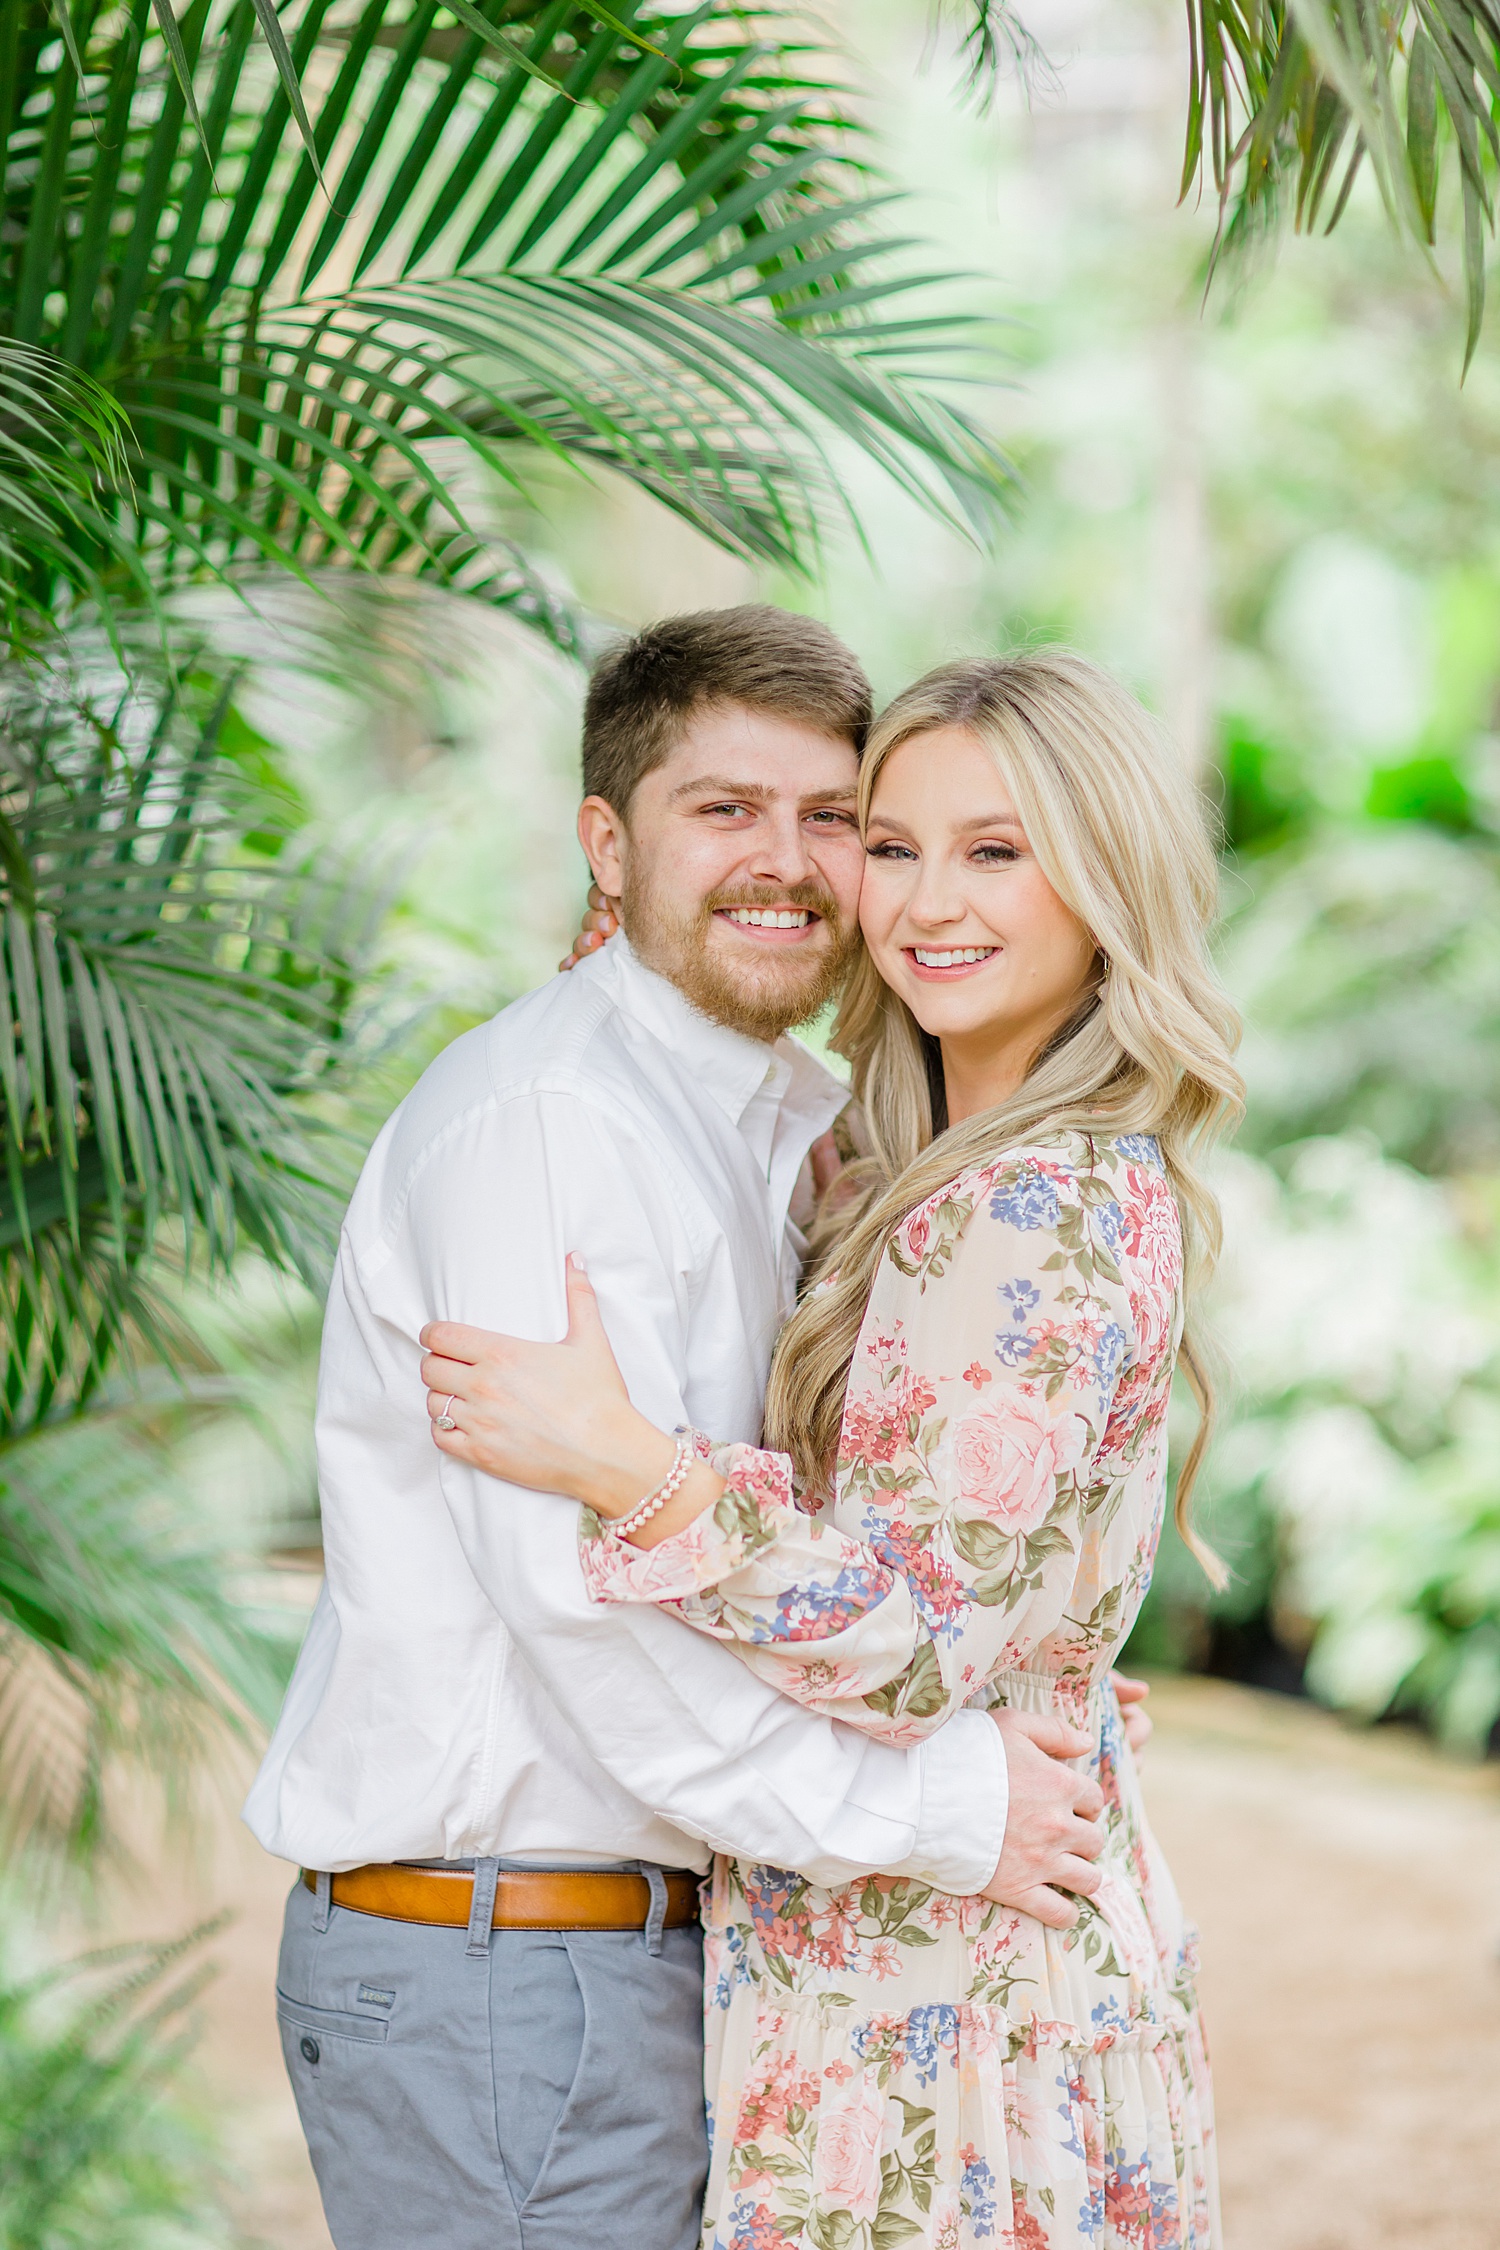 greenery surrounds couple during engagement photos